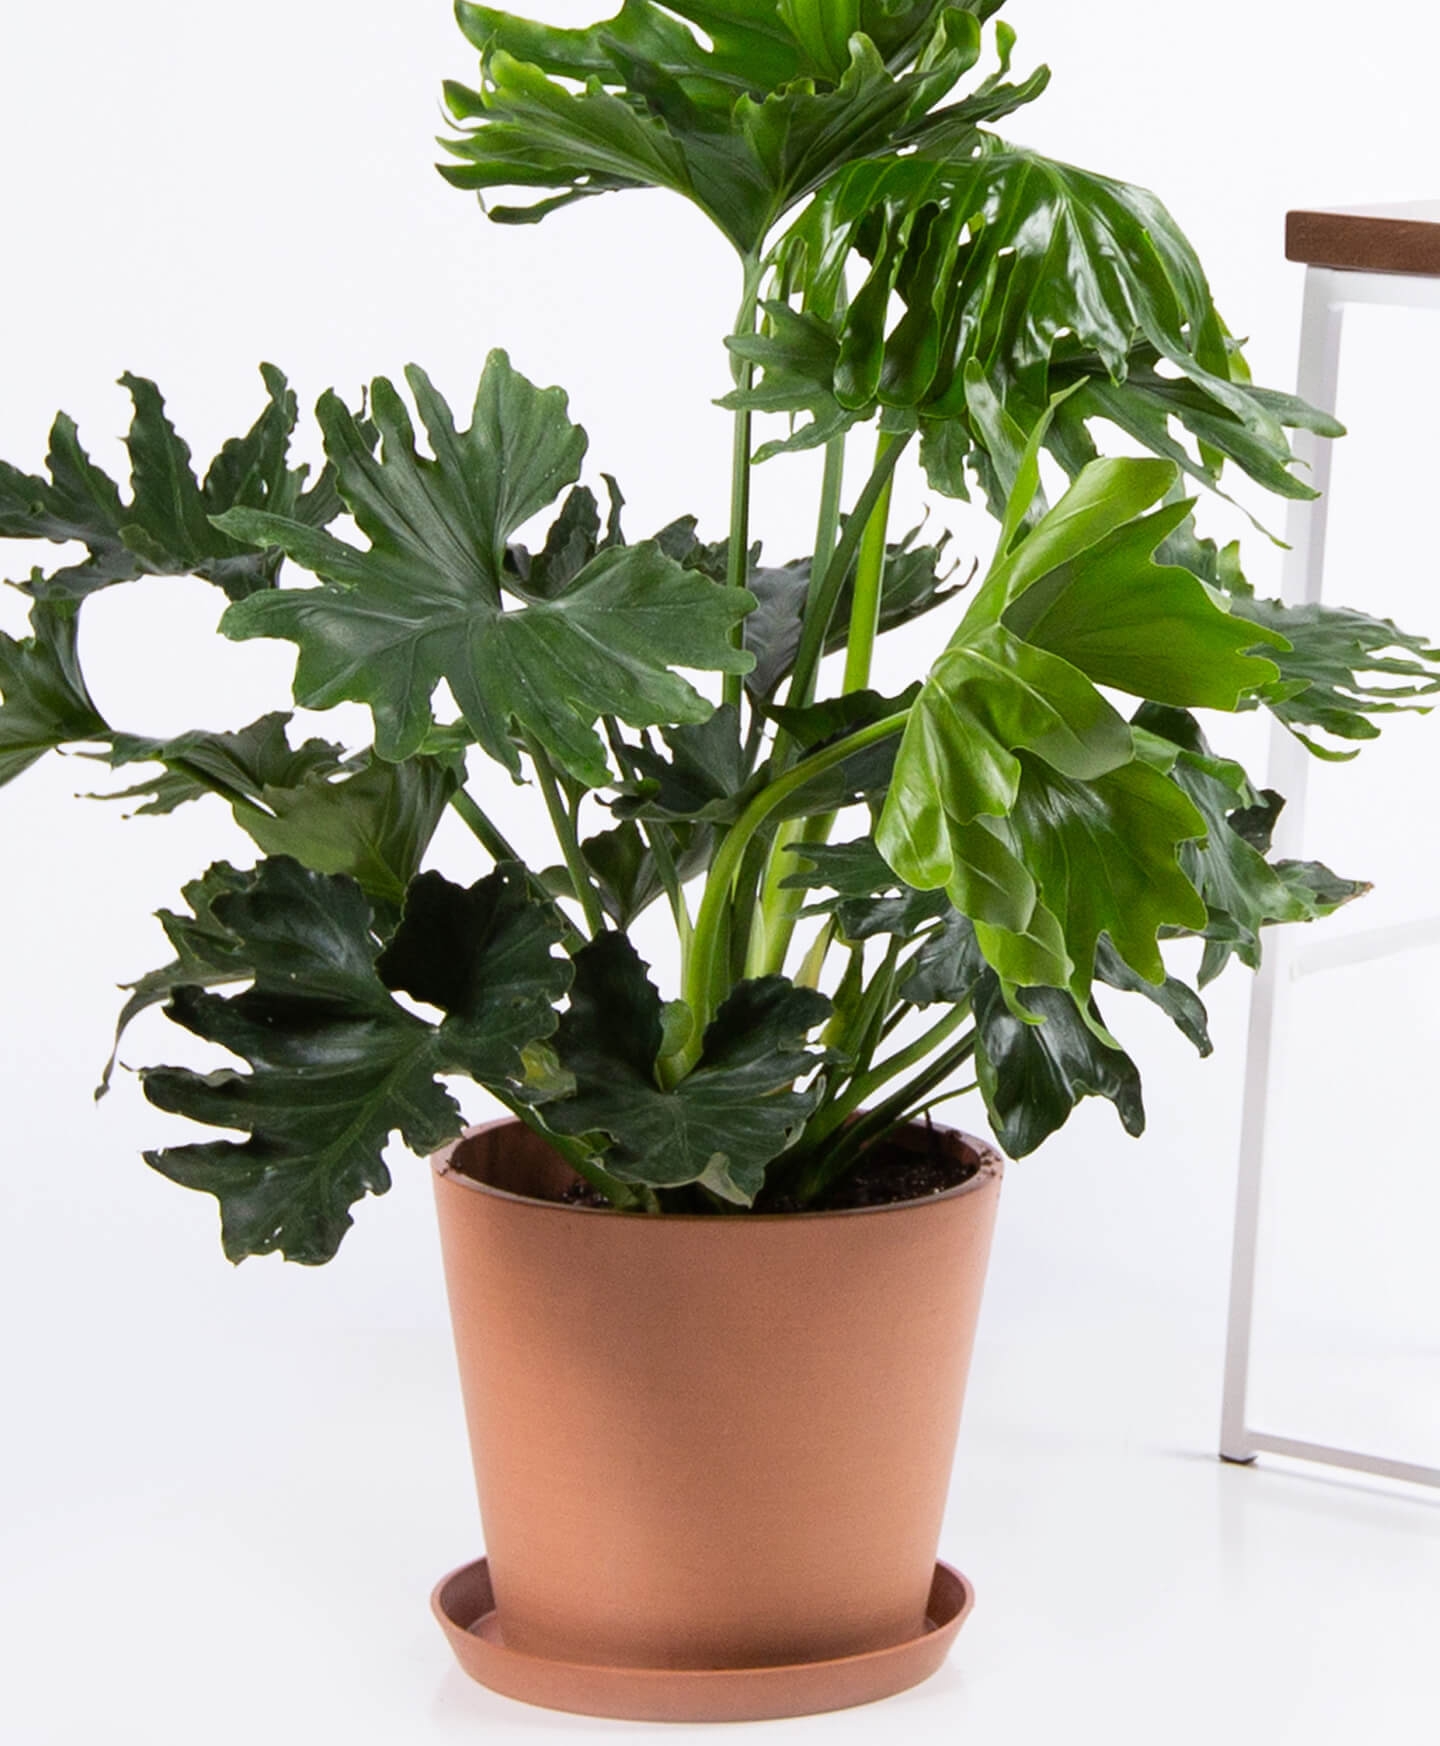 Philodendron hope selloum - Clay - Image 0